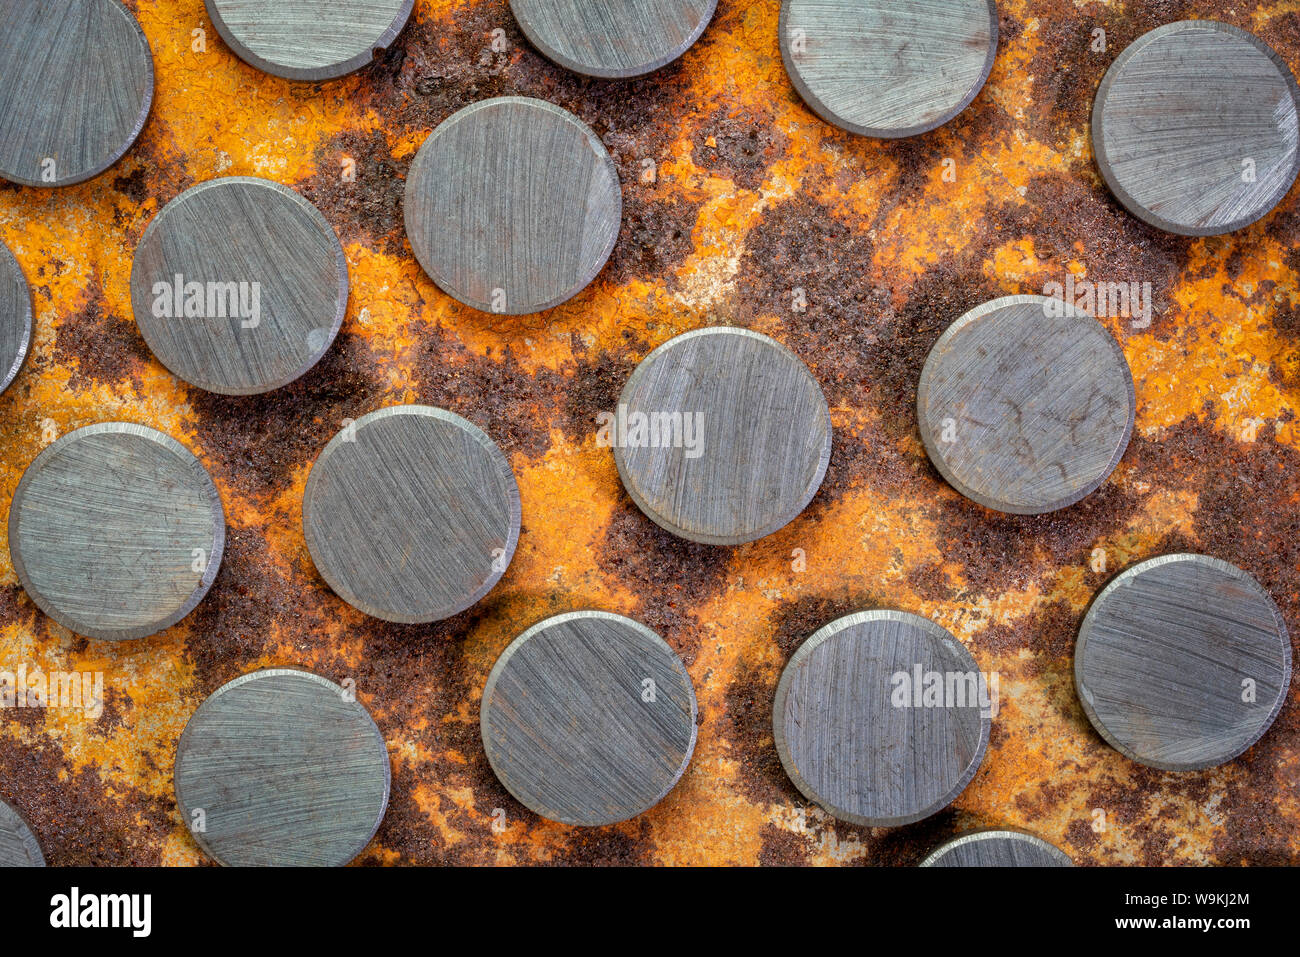 set of small round ceramic ferrite magnets - top view against rusty metal sheet Stock Photo